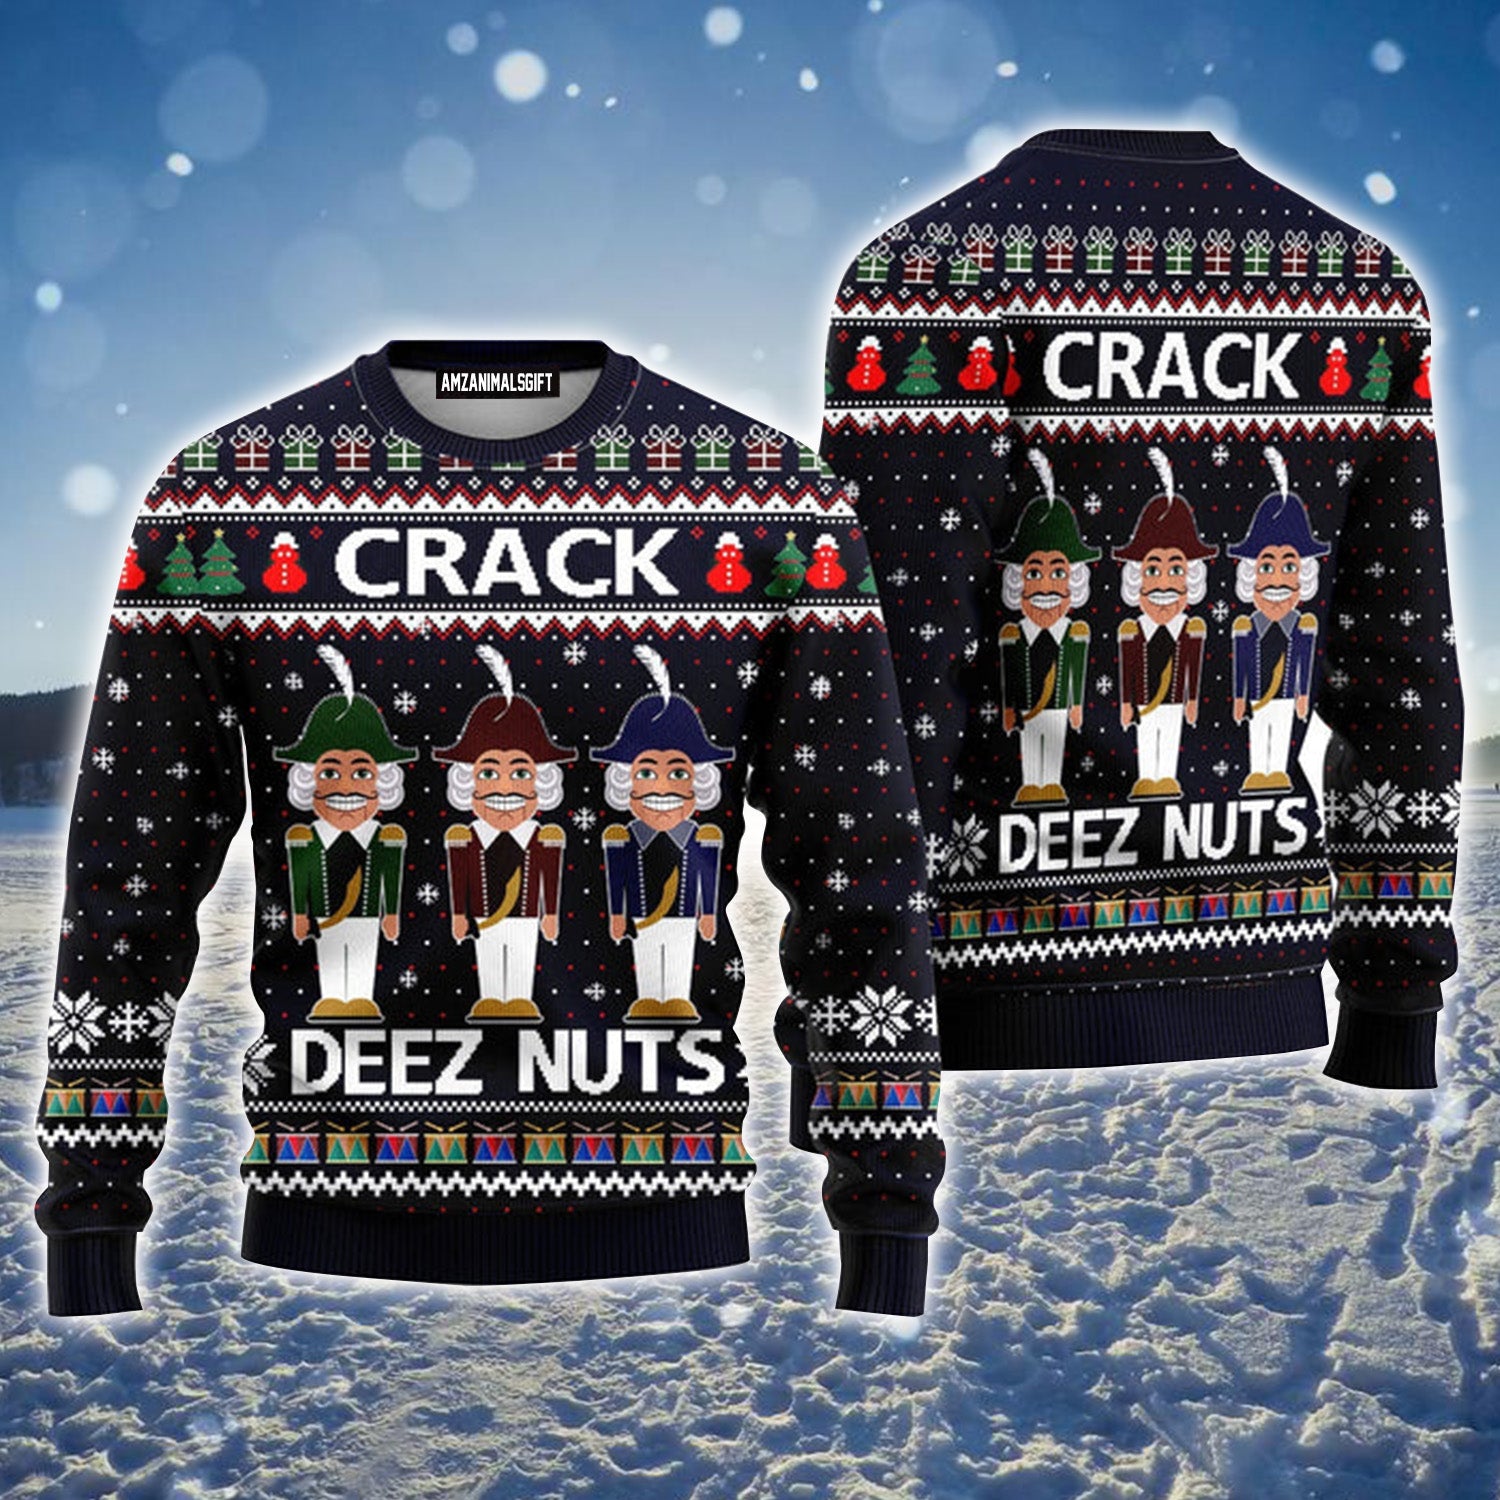 Crack Deez Nuts Black Urly Christmas Sweater, Christmas Sweater For Men & Women - Perfect Gift For Christmas, New Year, Winter Holiday